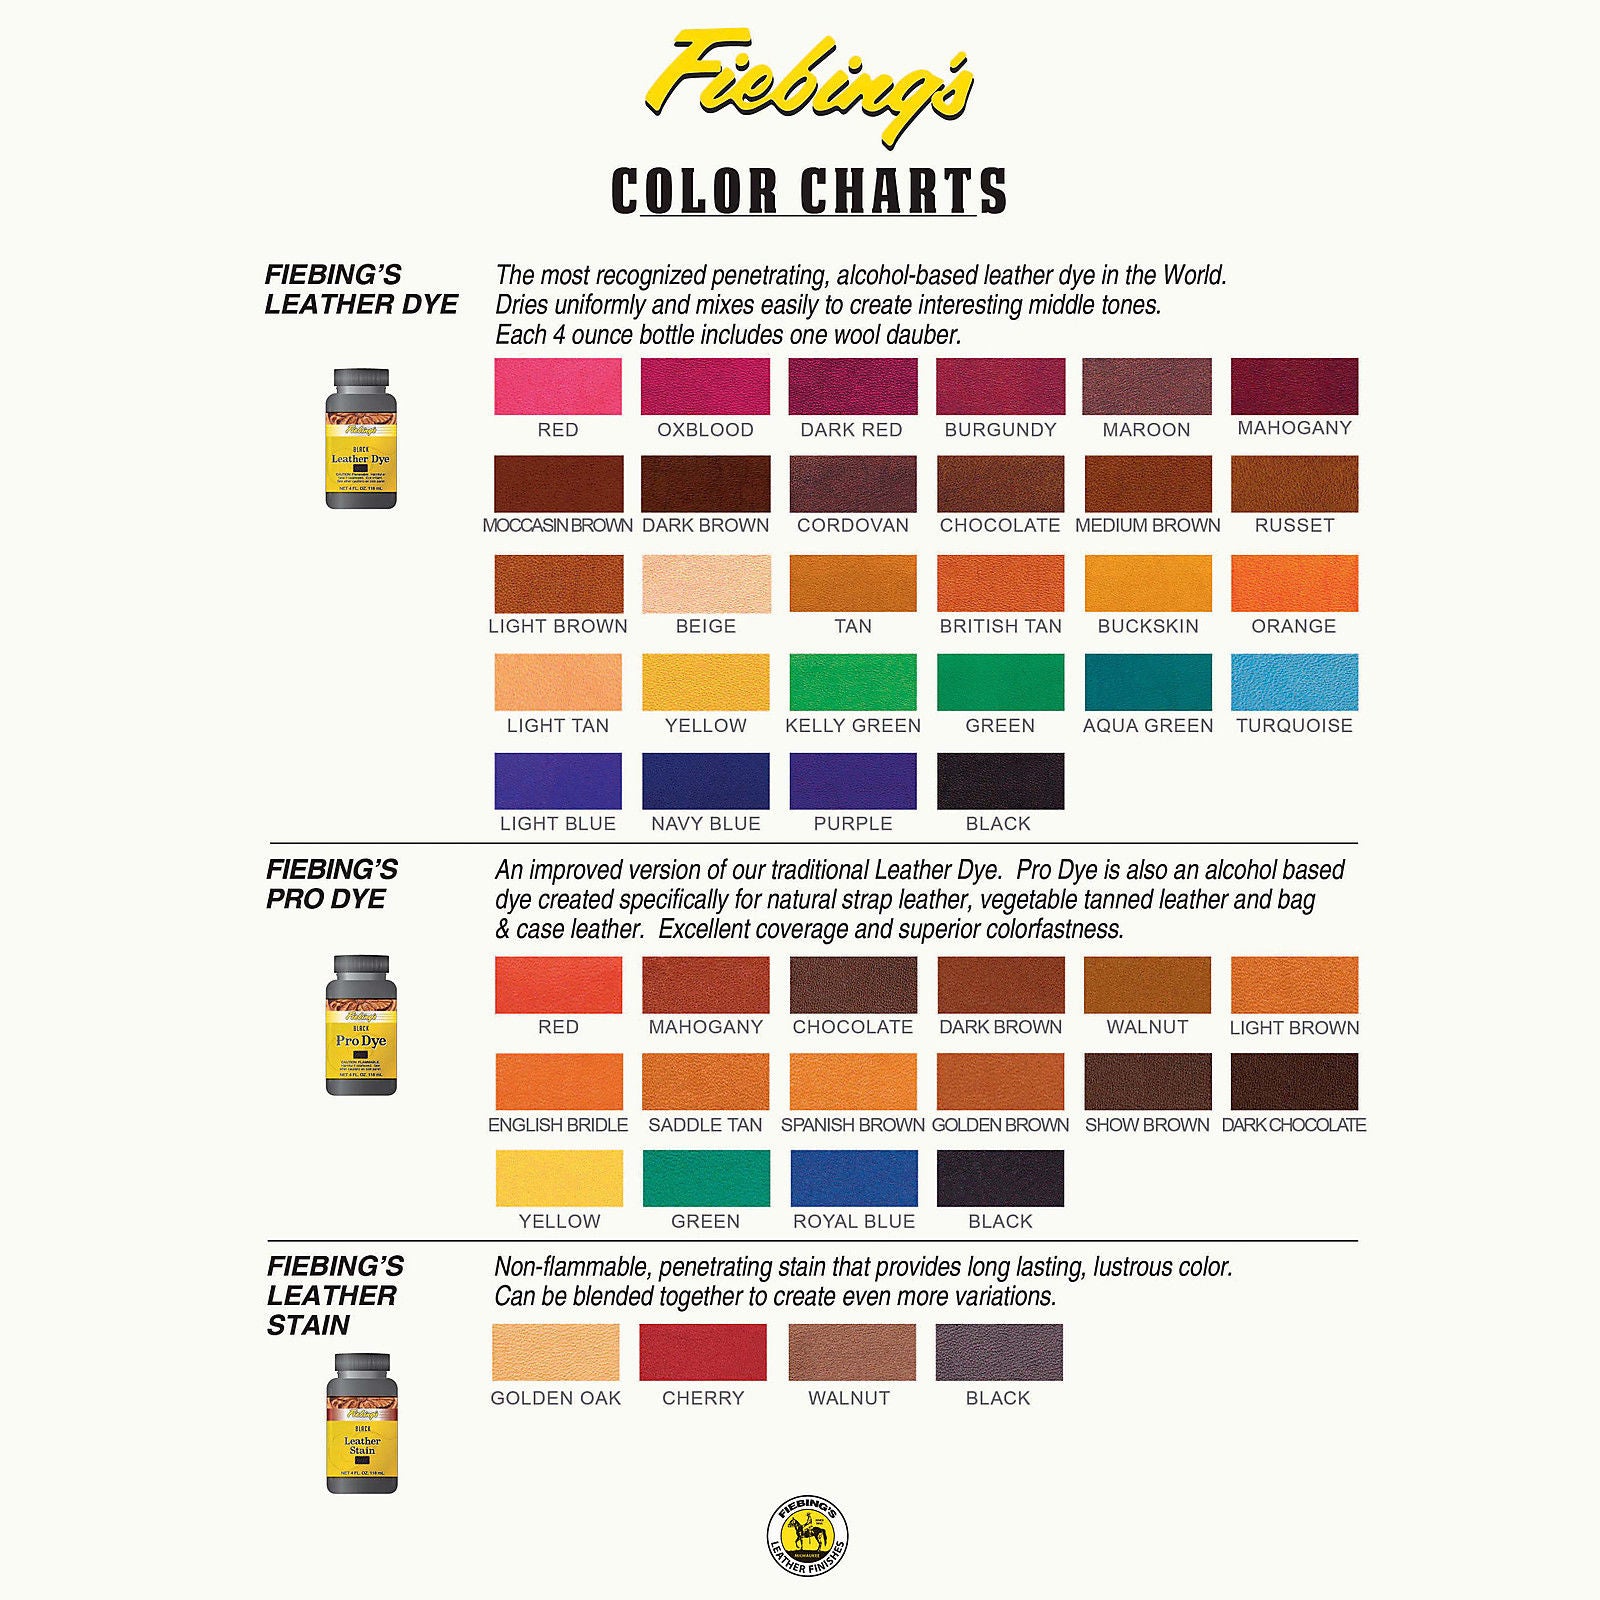 Fiebings Leather Dye 'Real' Colour Chart